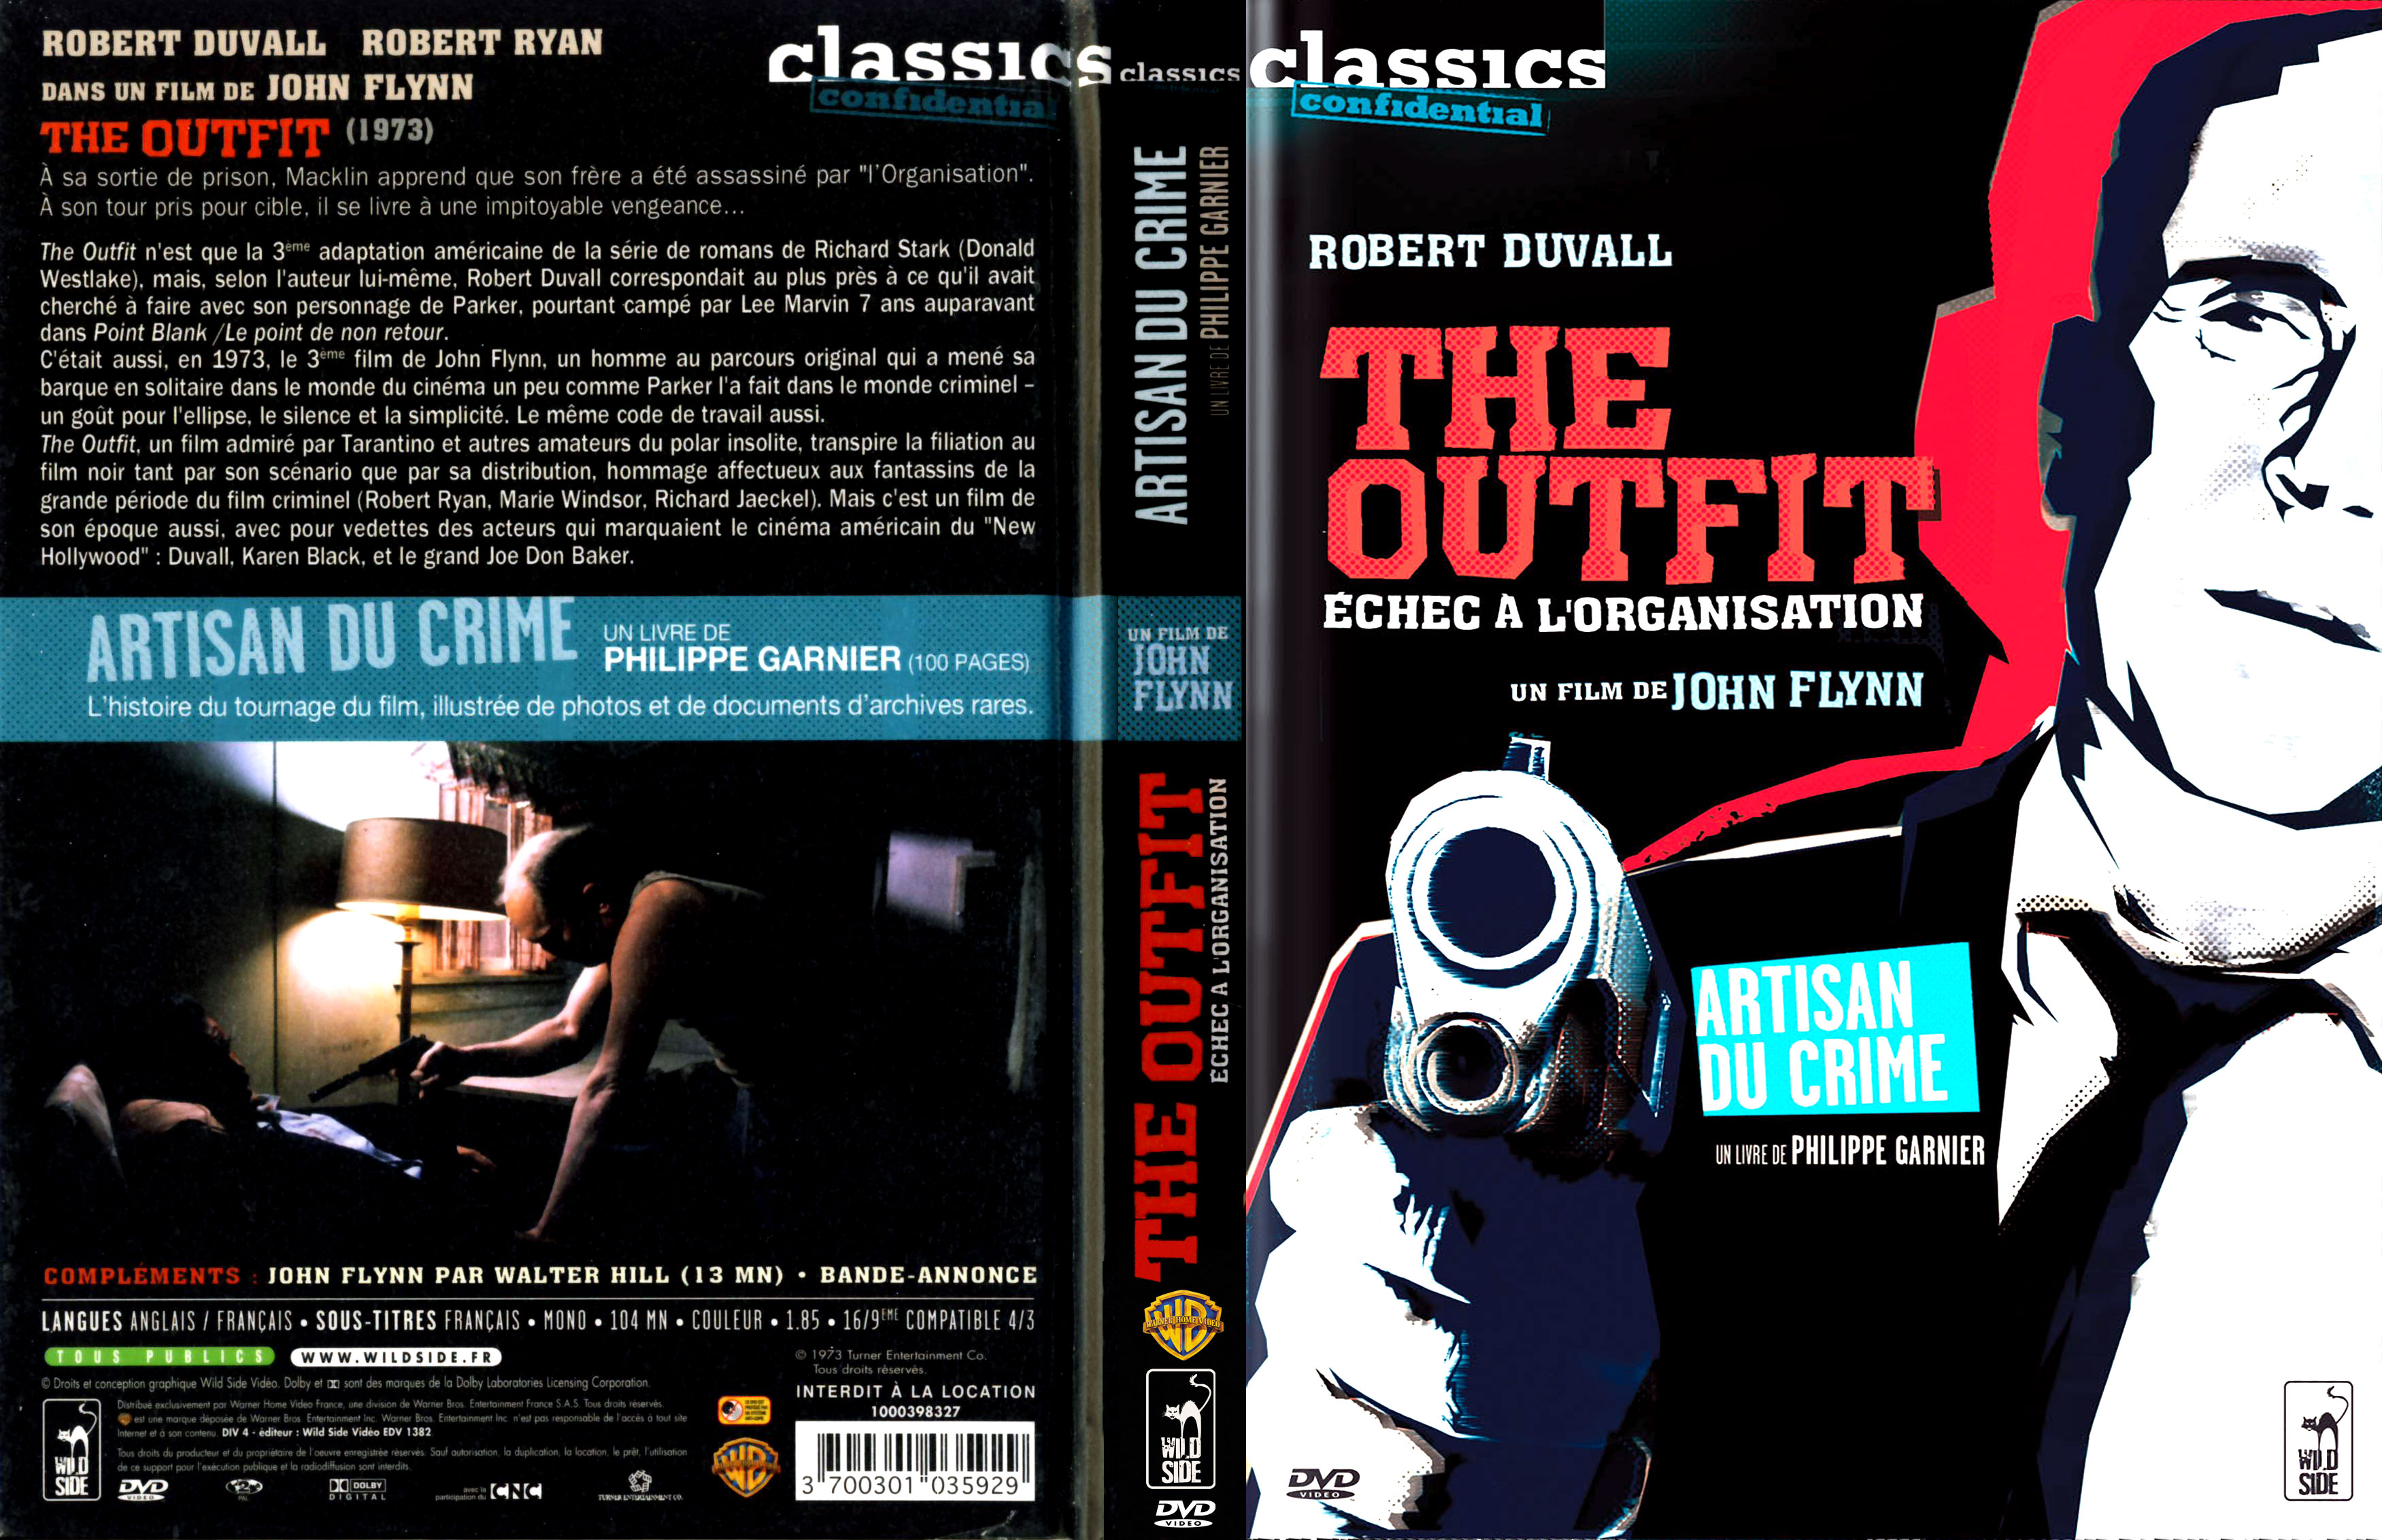 Jaquette DVD The outfit